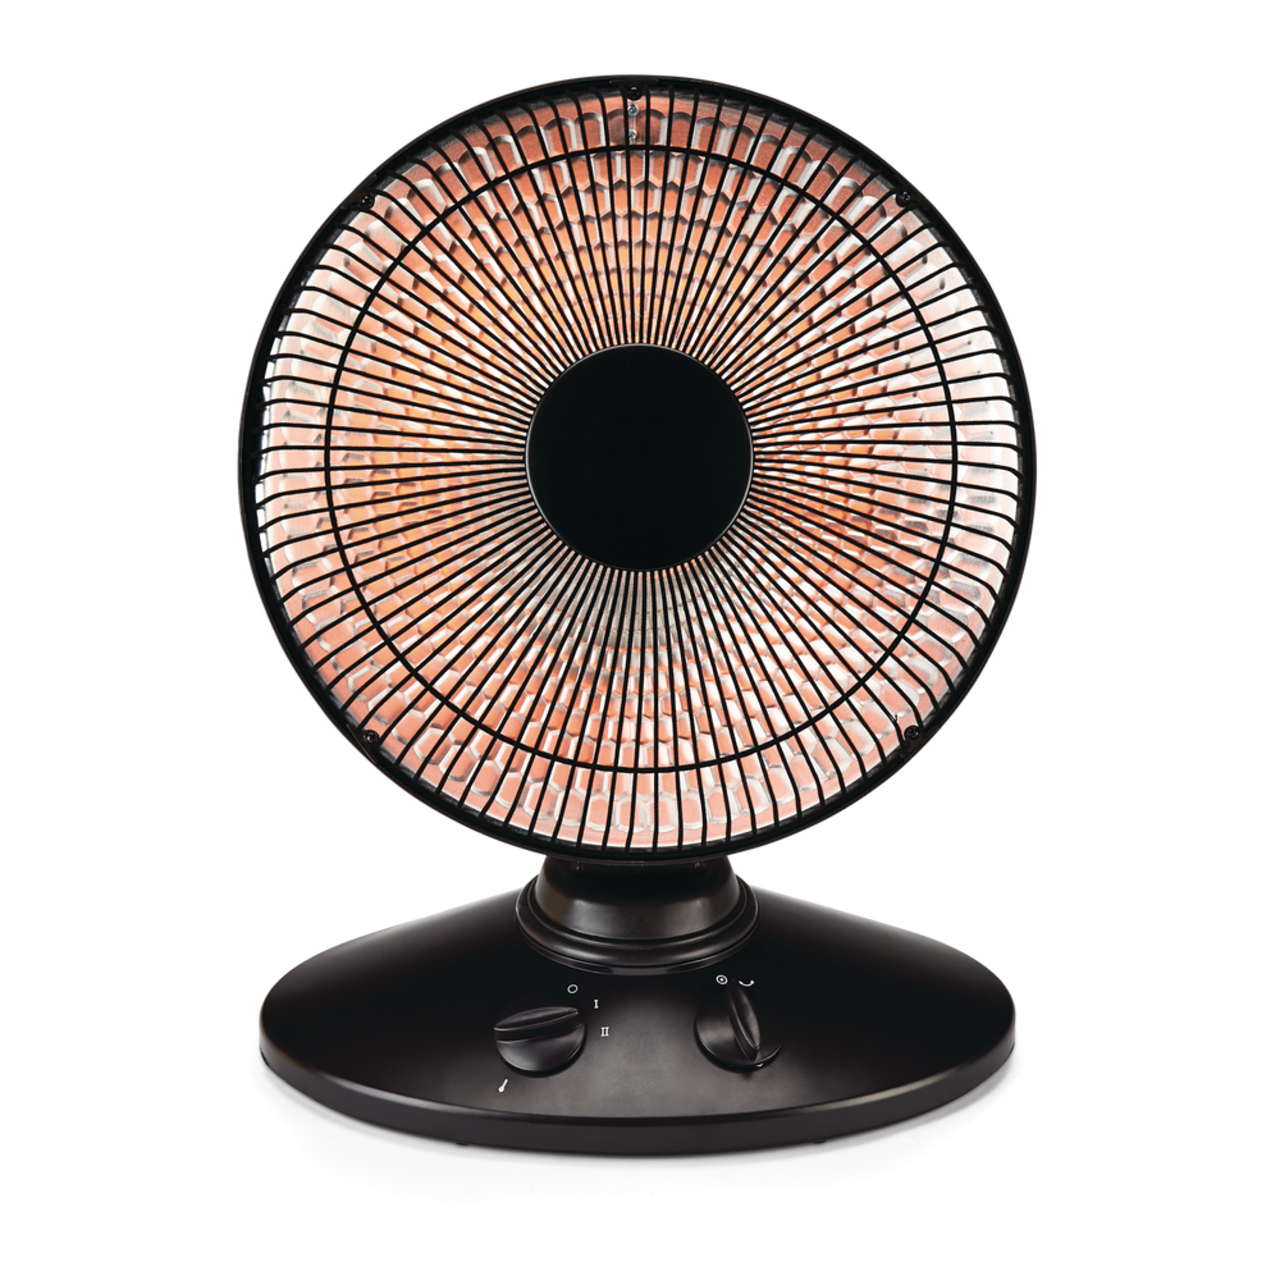 https://media-www.canadiantire.ca/product/fixing/home-environment/winter-climate-control/0435999/noma-oscillating-parablic-dish-radiating-heater-7aadd27c-3547-4a4d-9d9b-7d3e98ea2c47.png?imdensity=1&imwidth=640&impolicy=mZoom